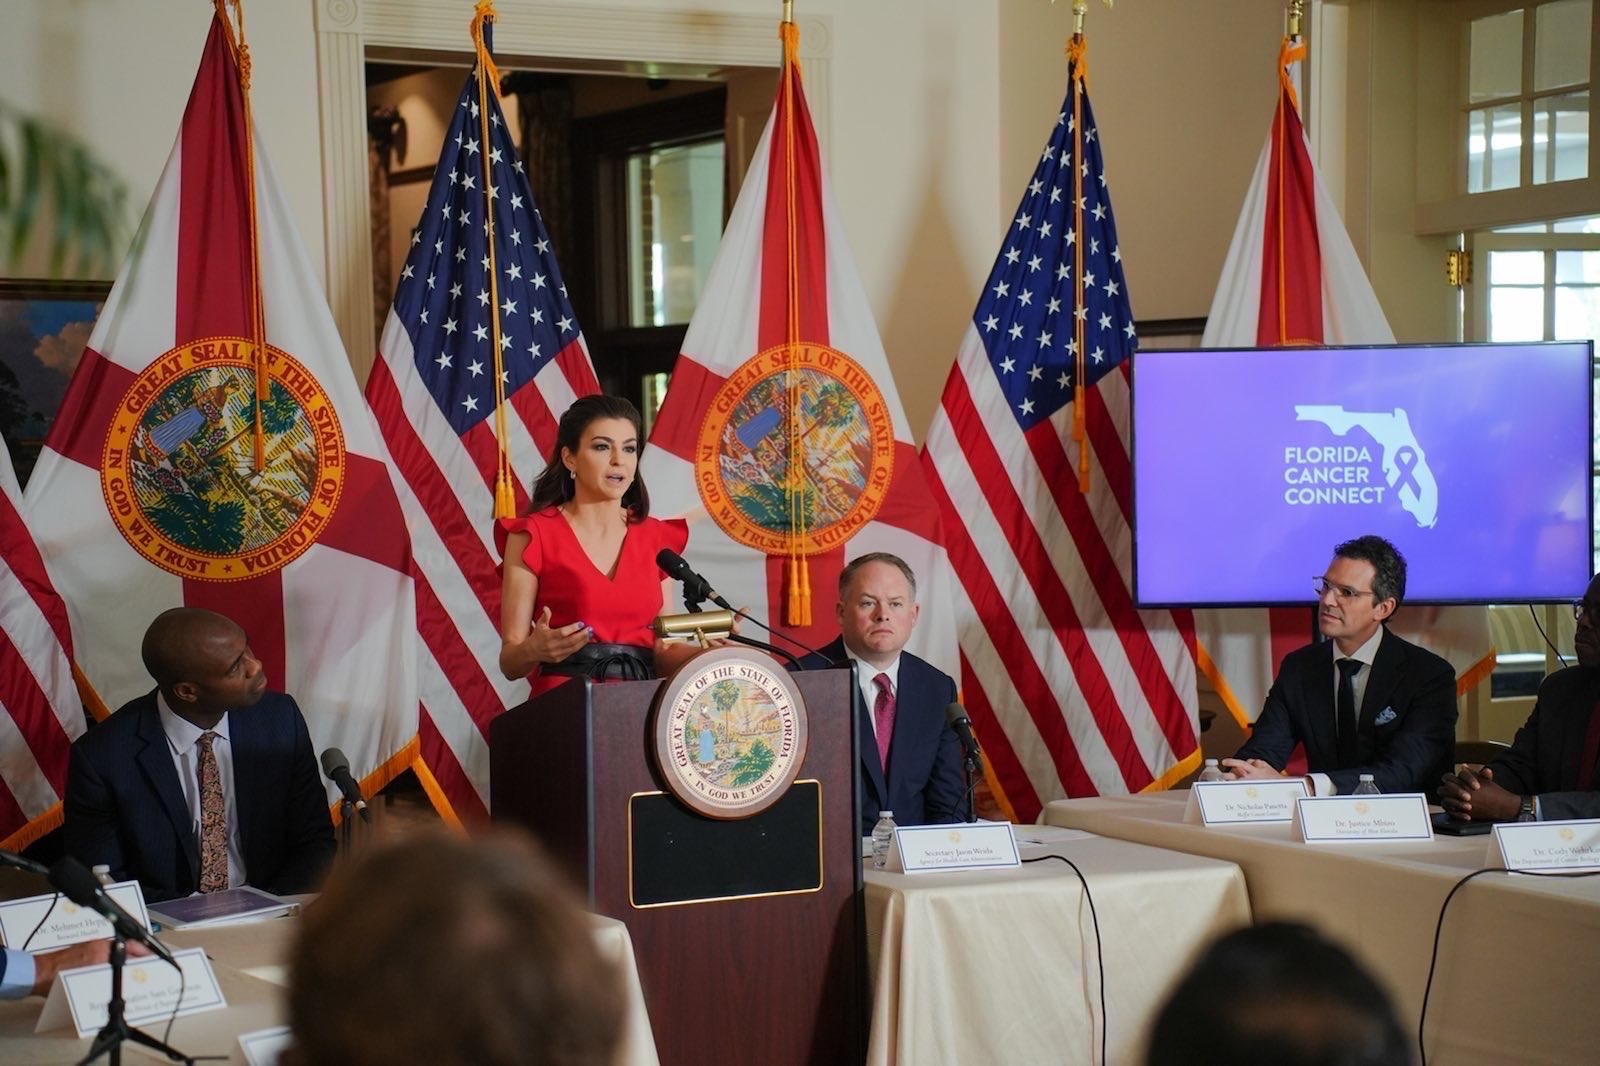 Governor Ron DeSantis and First Lady Casey DeSantis Award $20 Million to Support Innovative Cancer Research